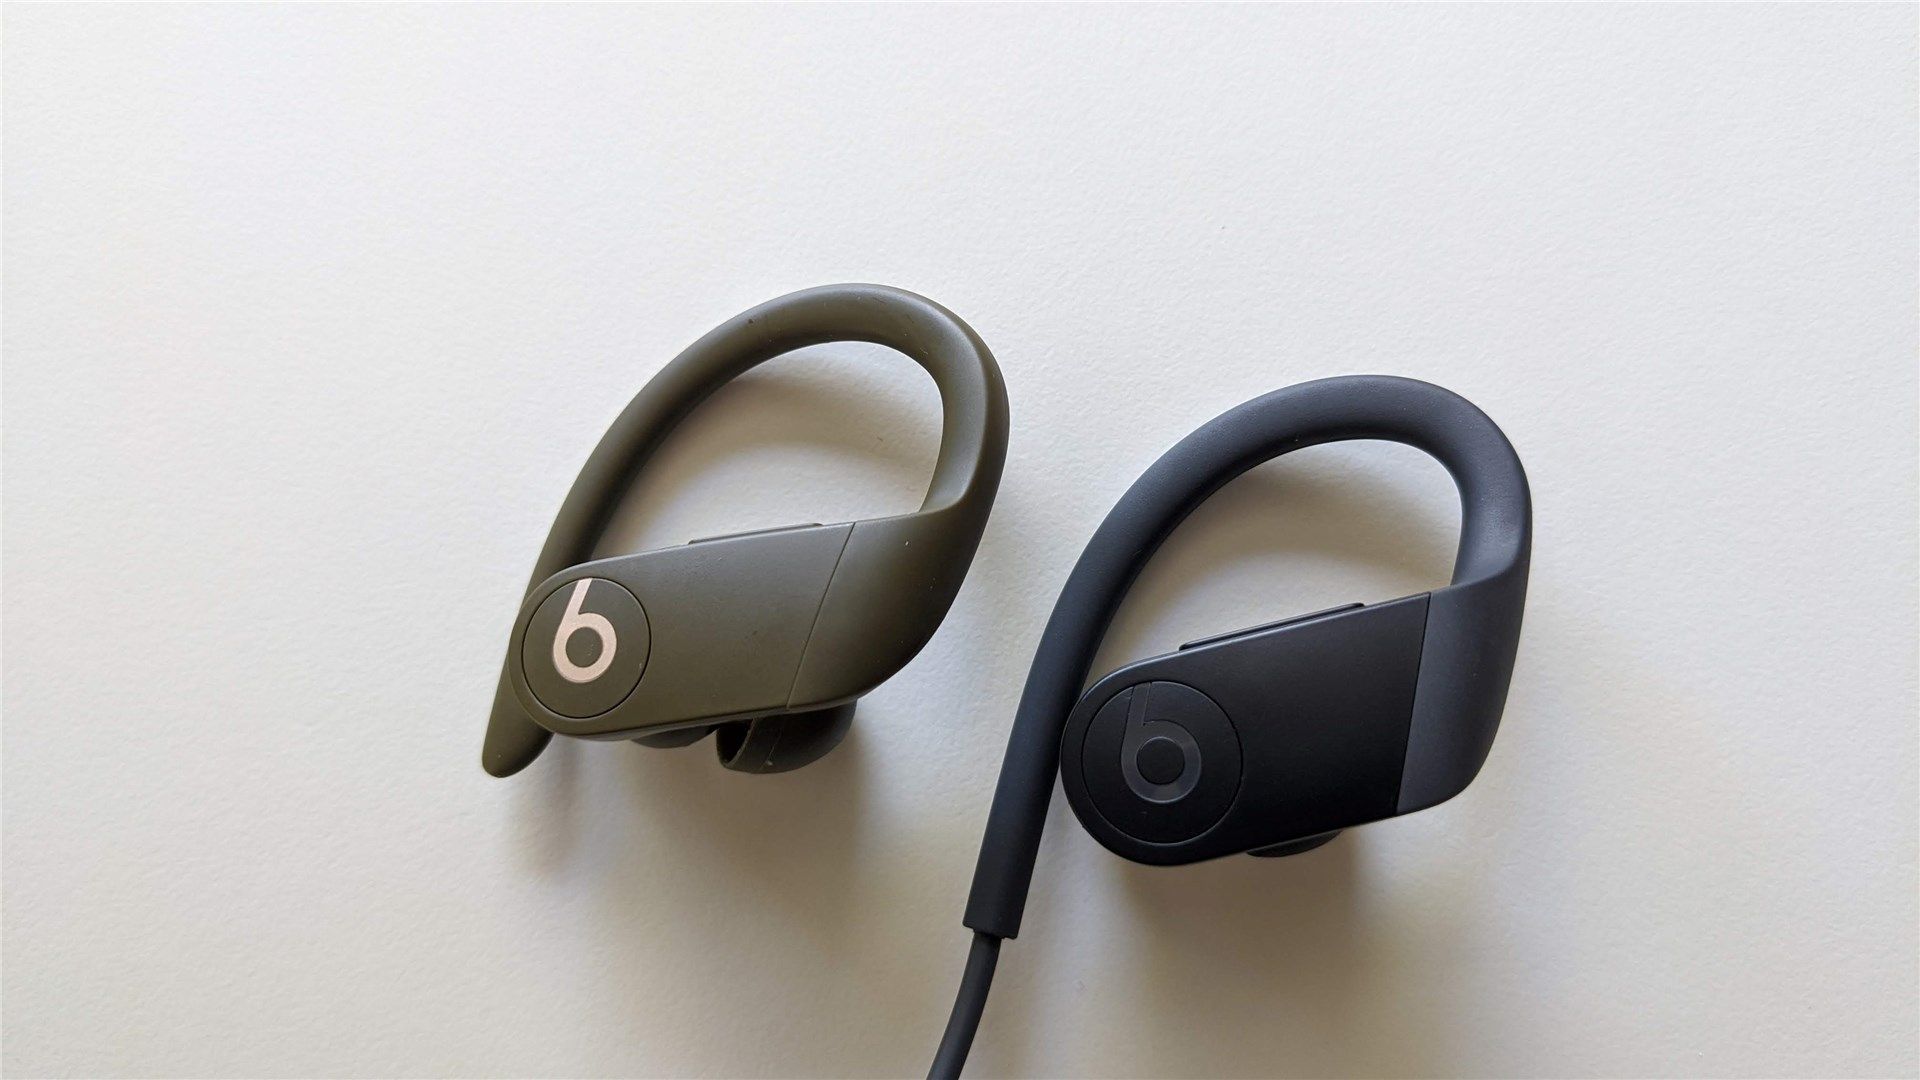 The Powerbeats Pro compared to the Powerbeats